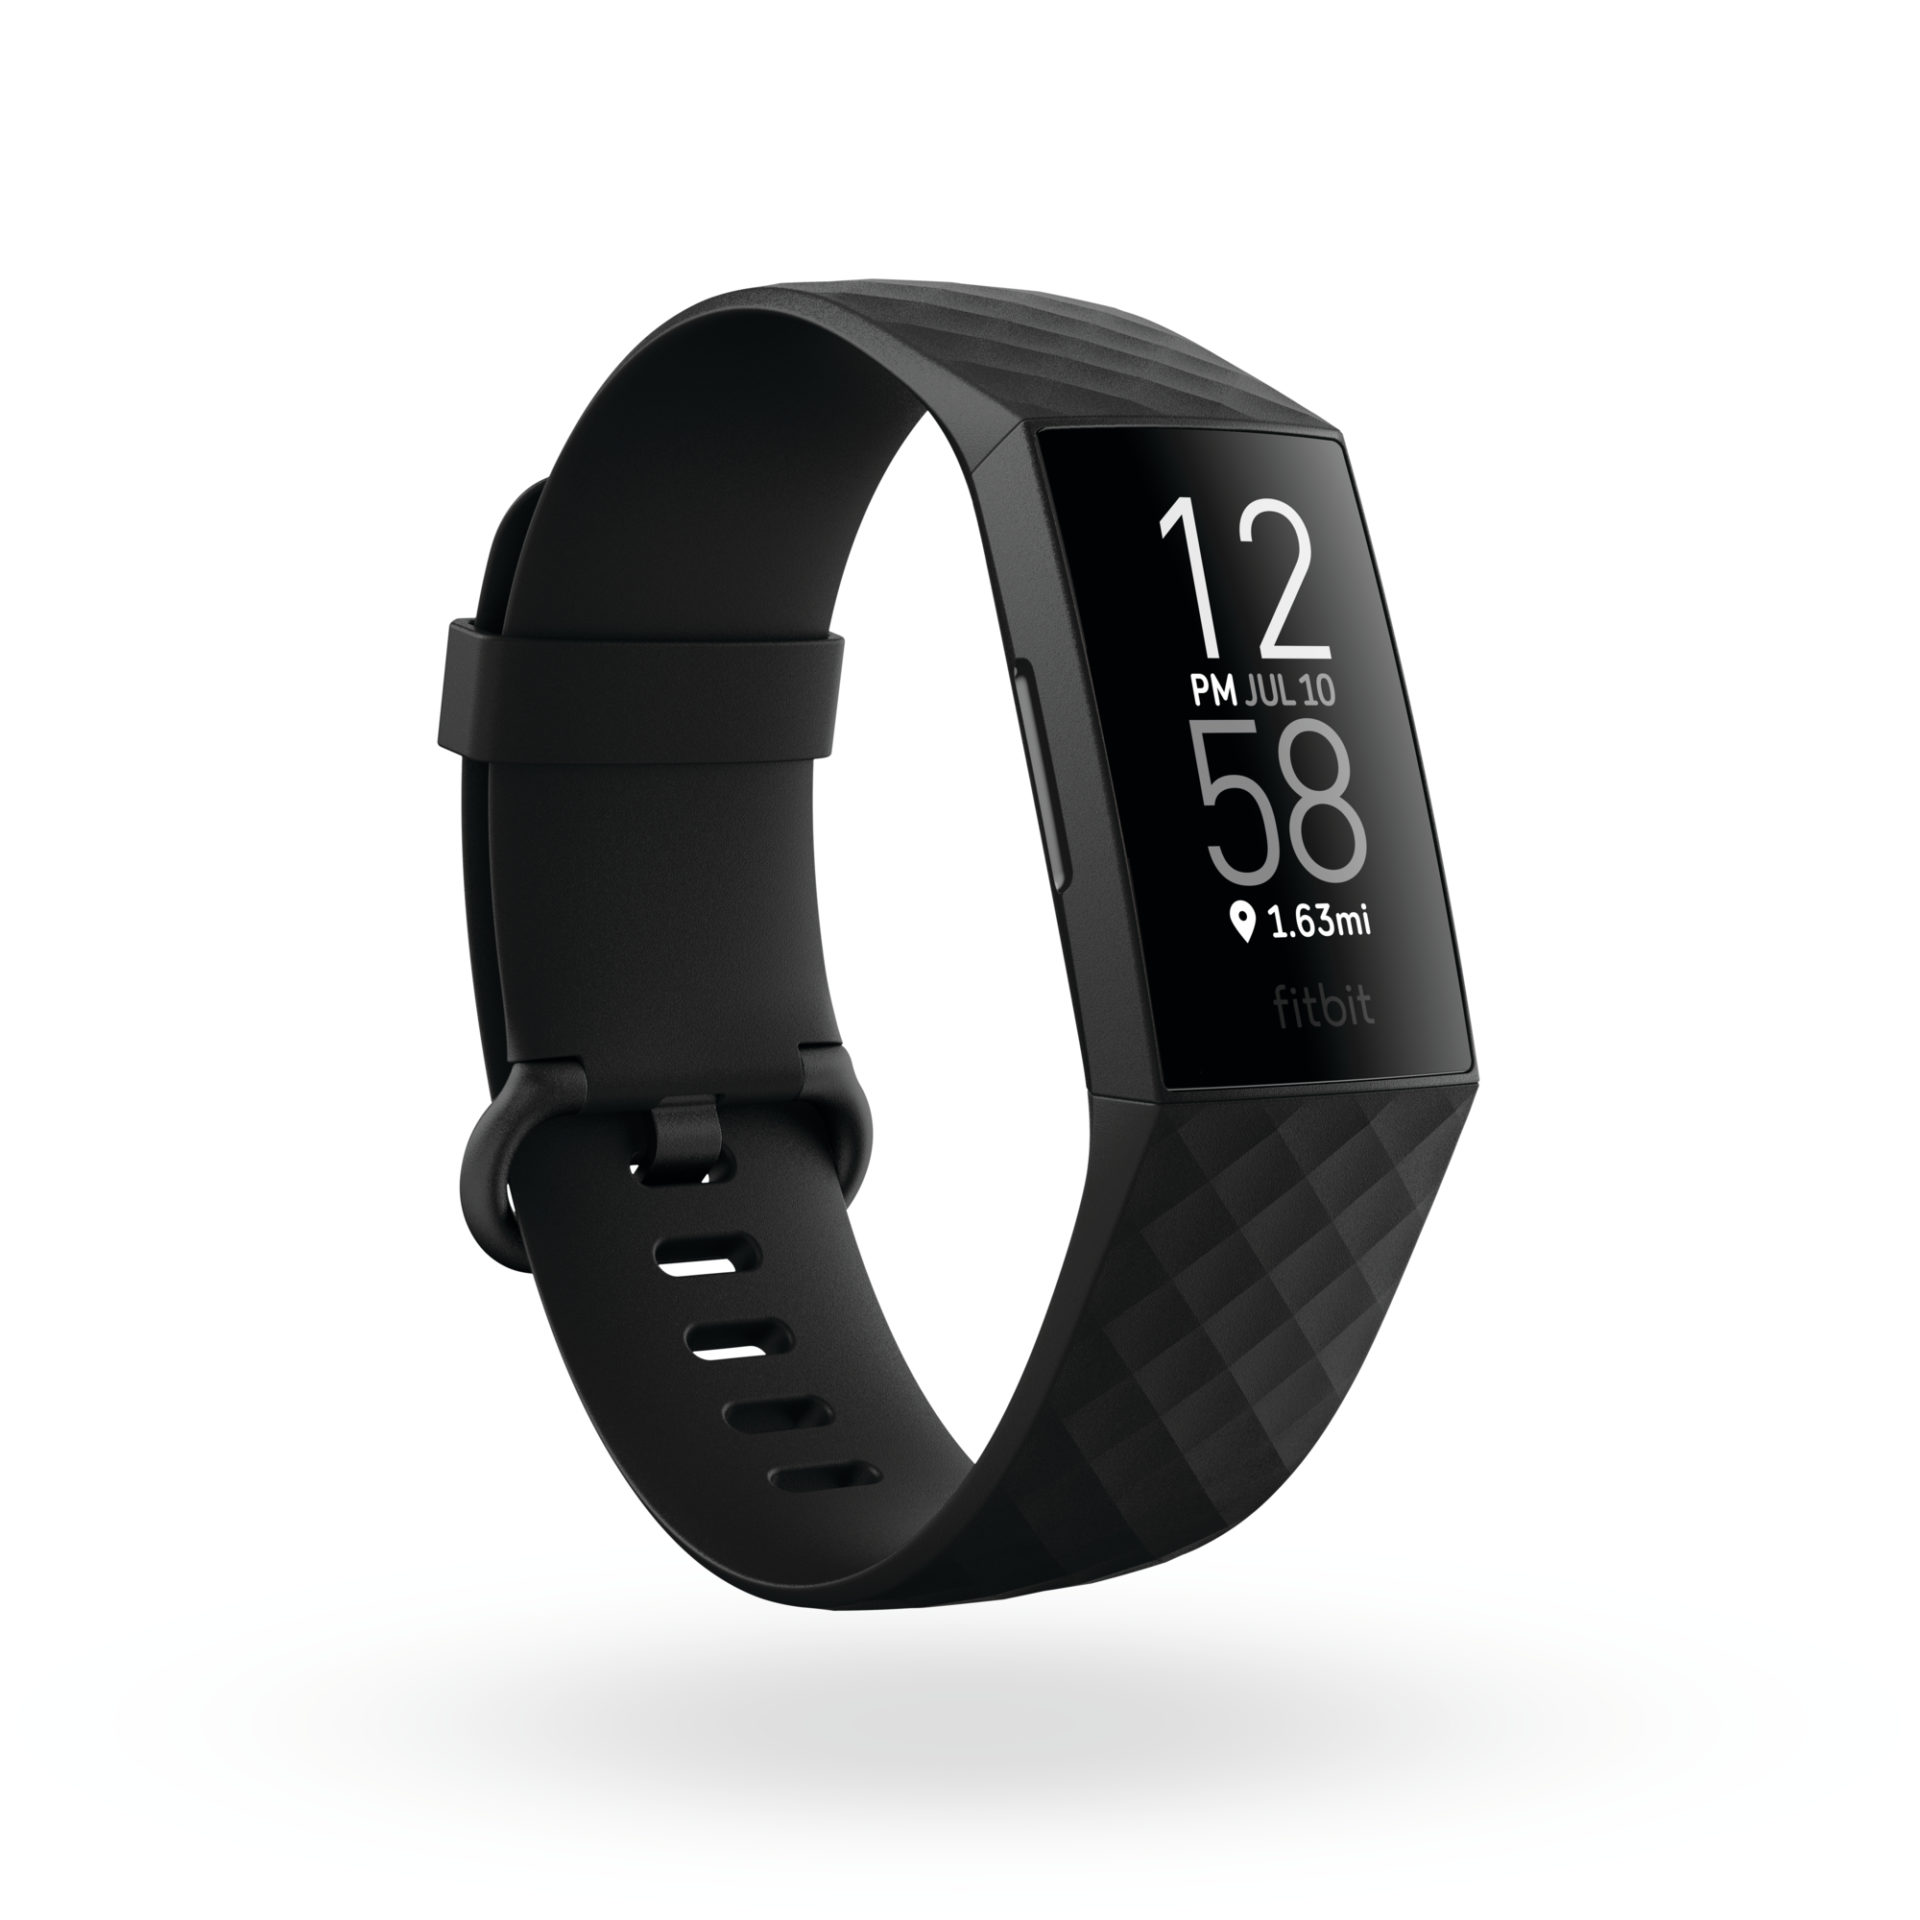 Fitbit Luxe vs. Inspire 2 vs. Charge 4